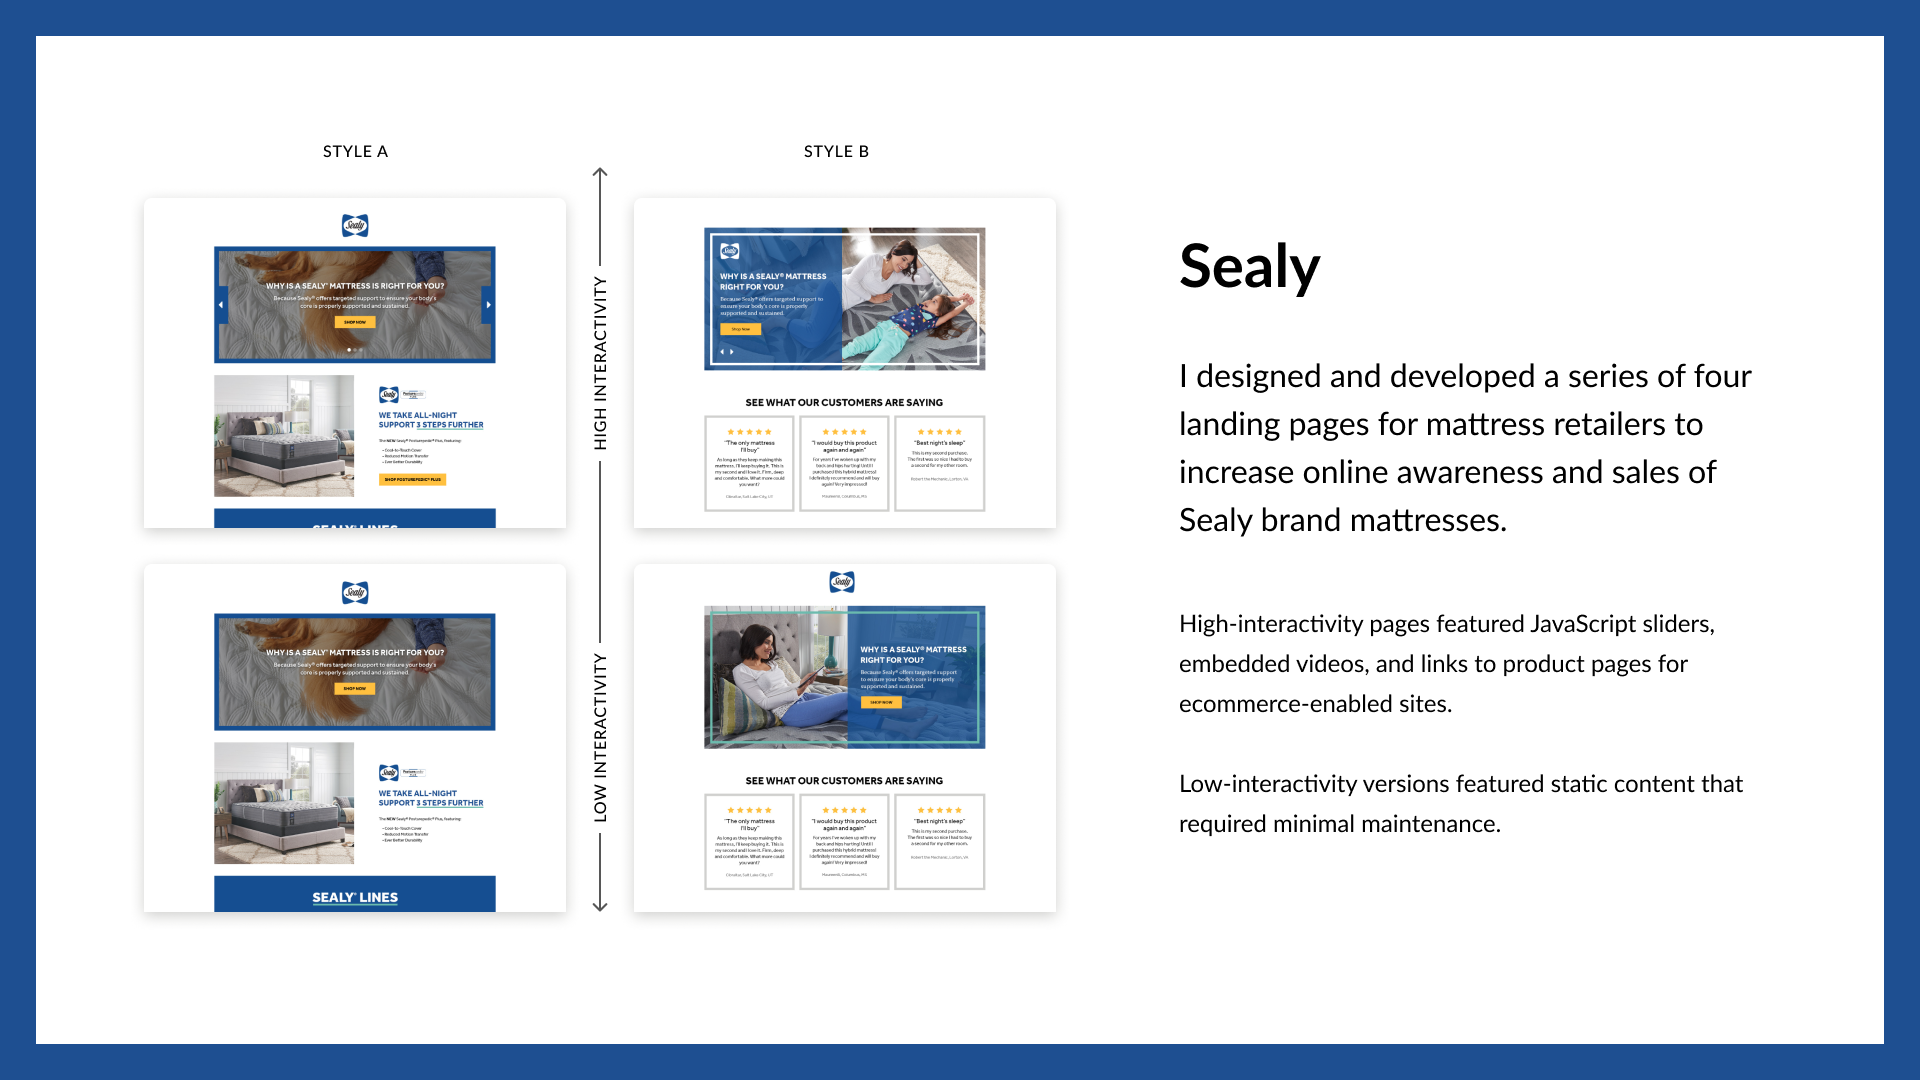 Sealy landing pages